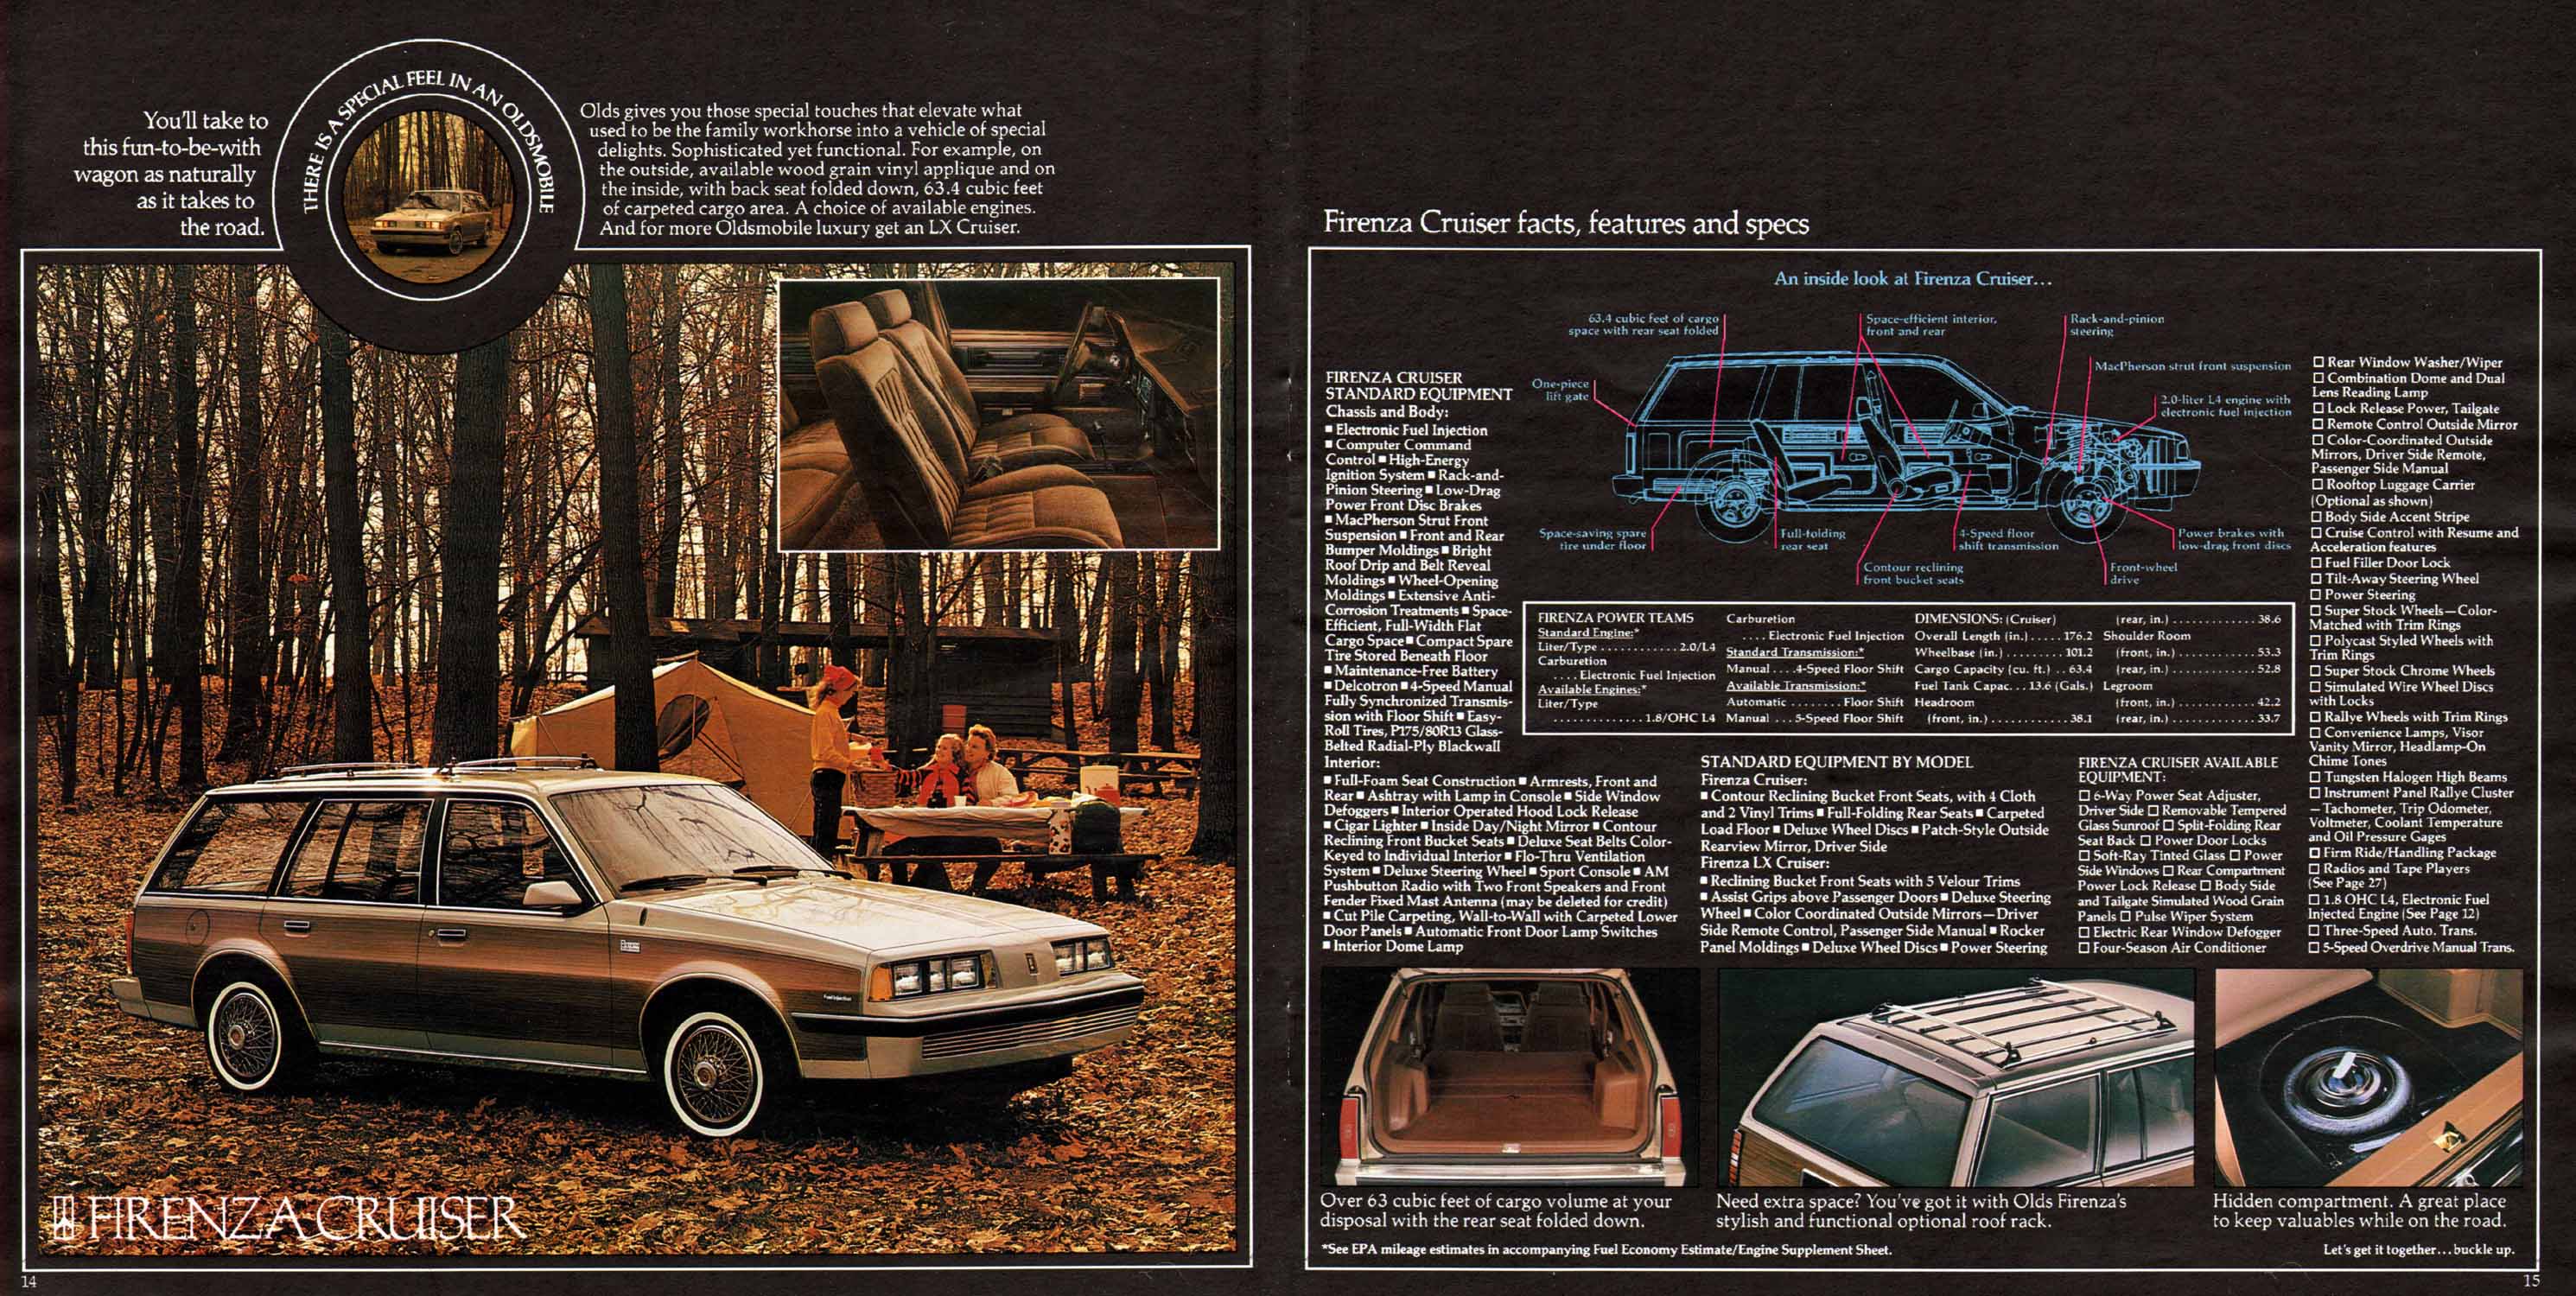 1984 Oldsmobile Small Size-14-15